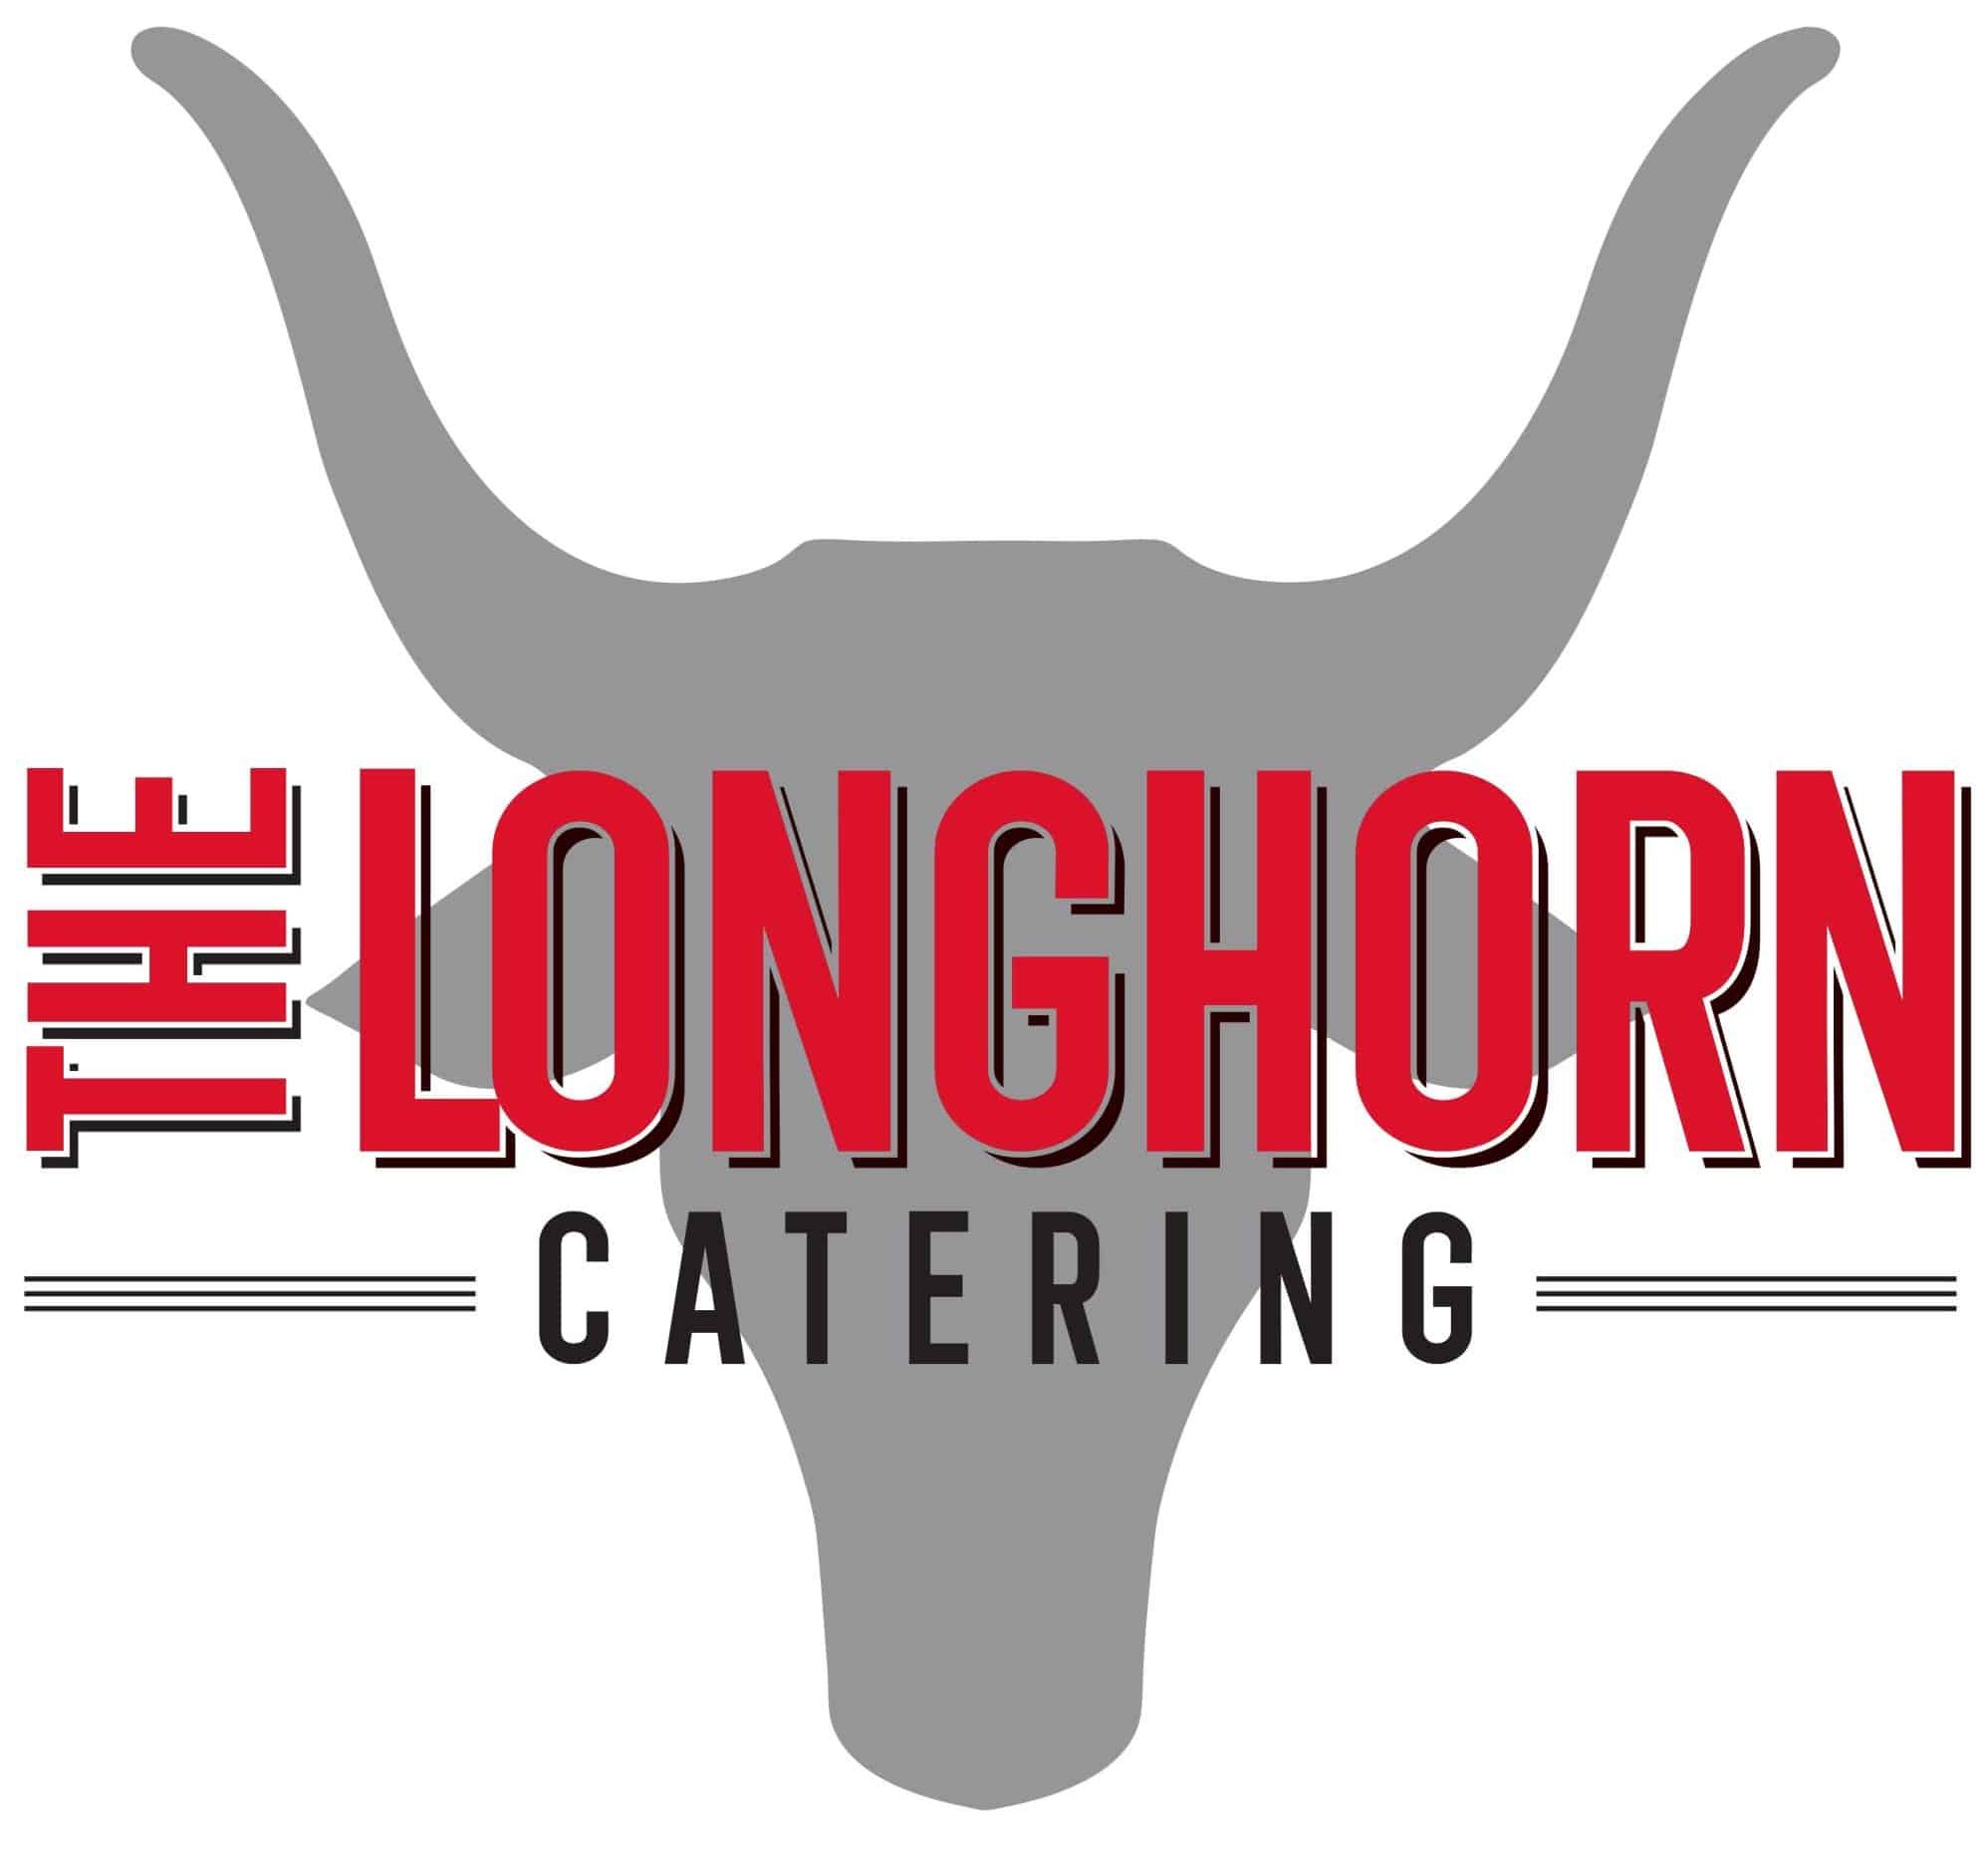 The Longhorn Catering